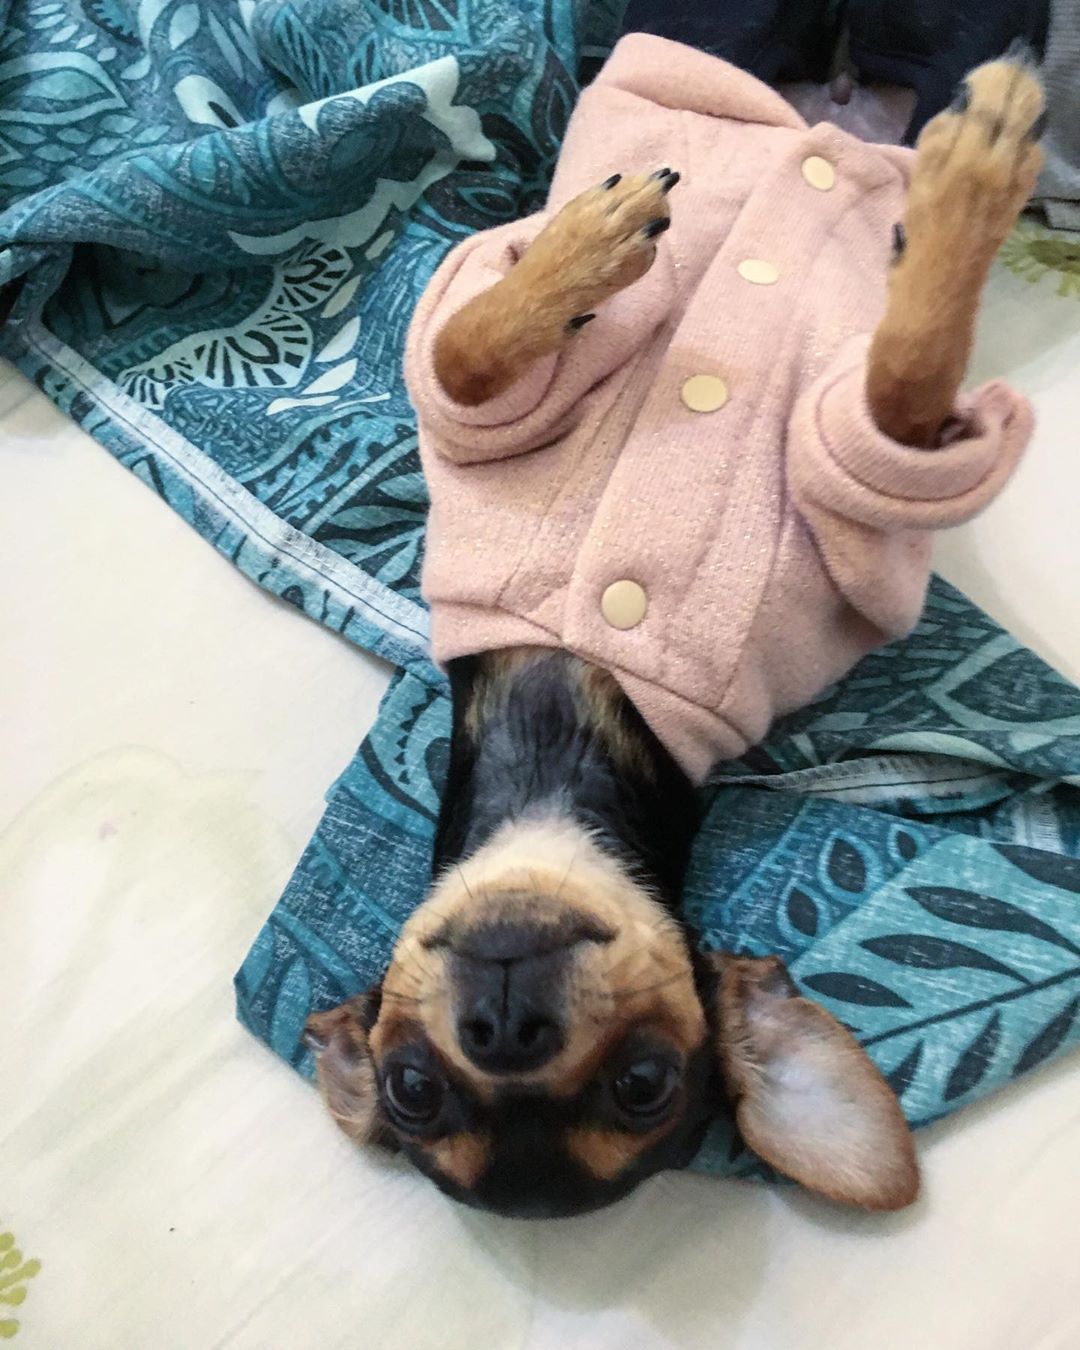 A Toy Fox Terrier wearing a pink sweater while lying on its back on the bed